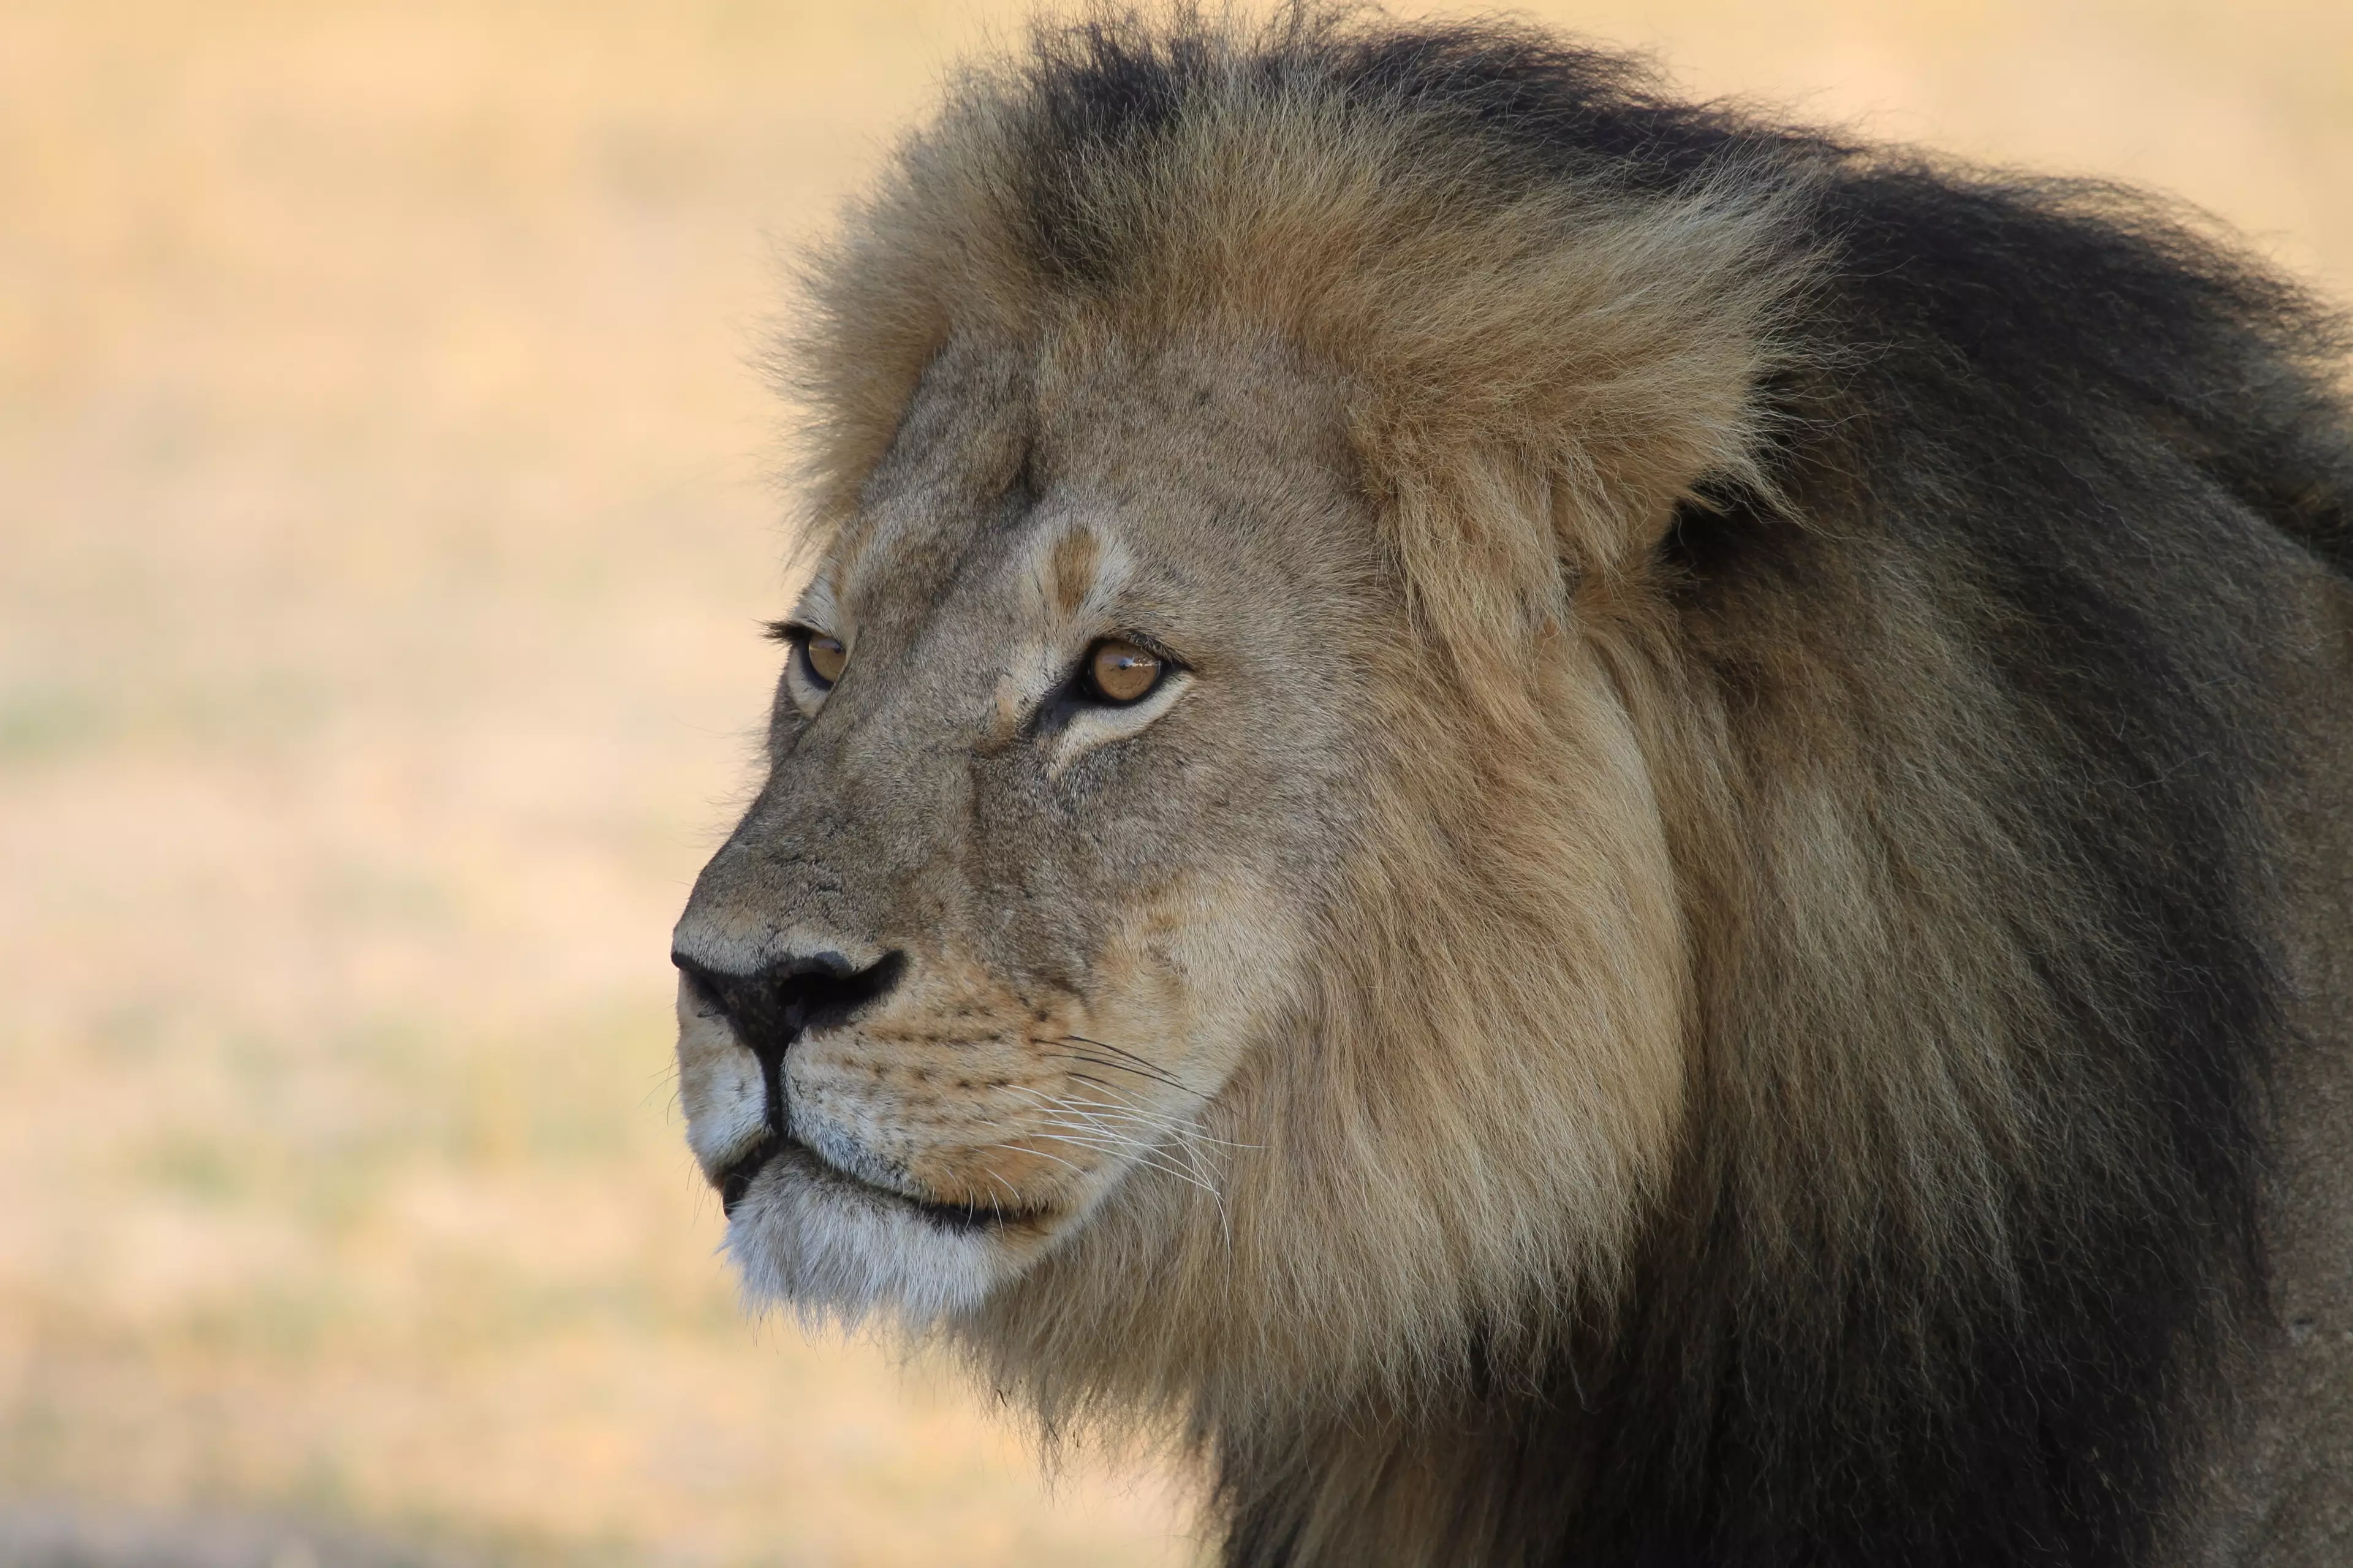 Cecil the lion, who died in 2015.